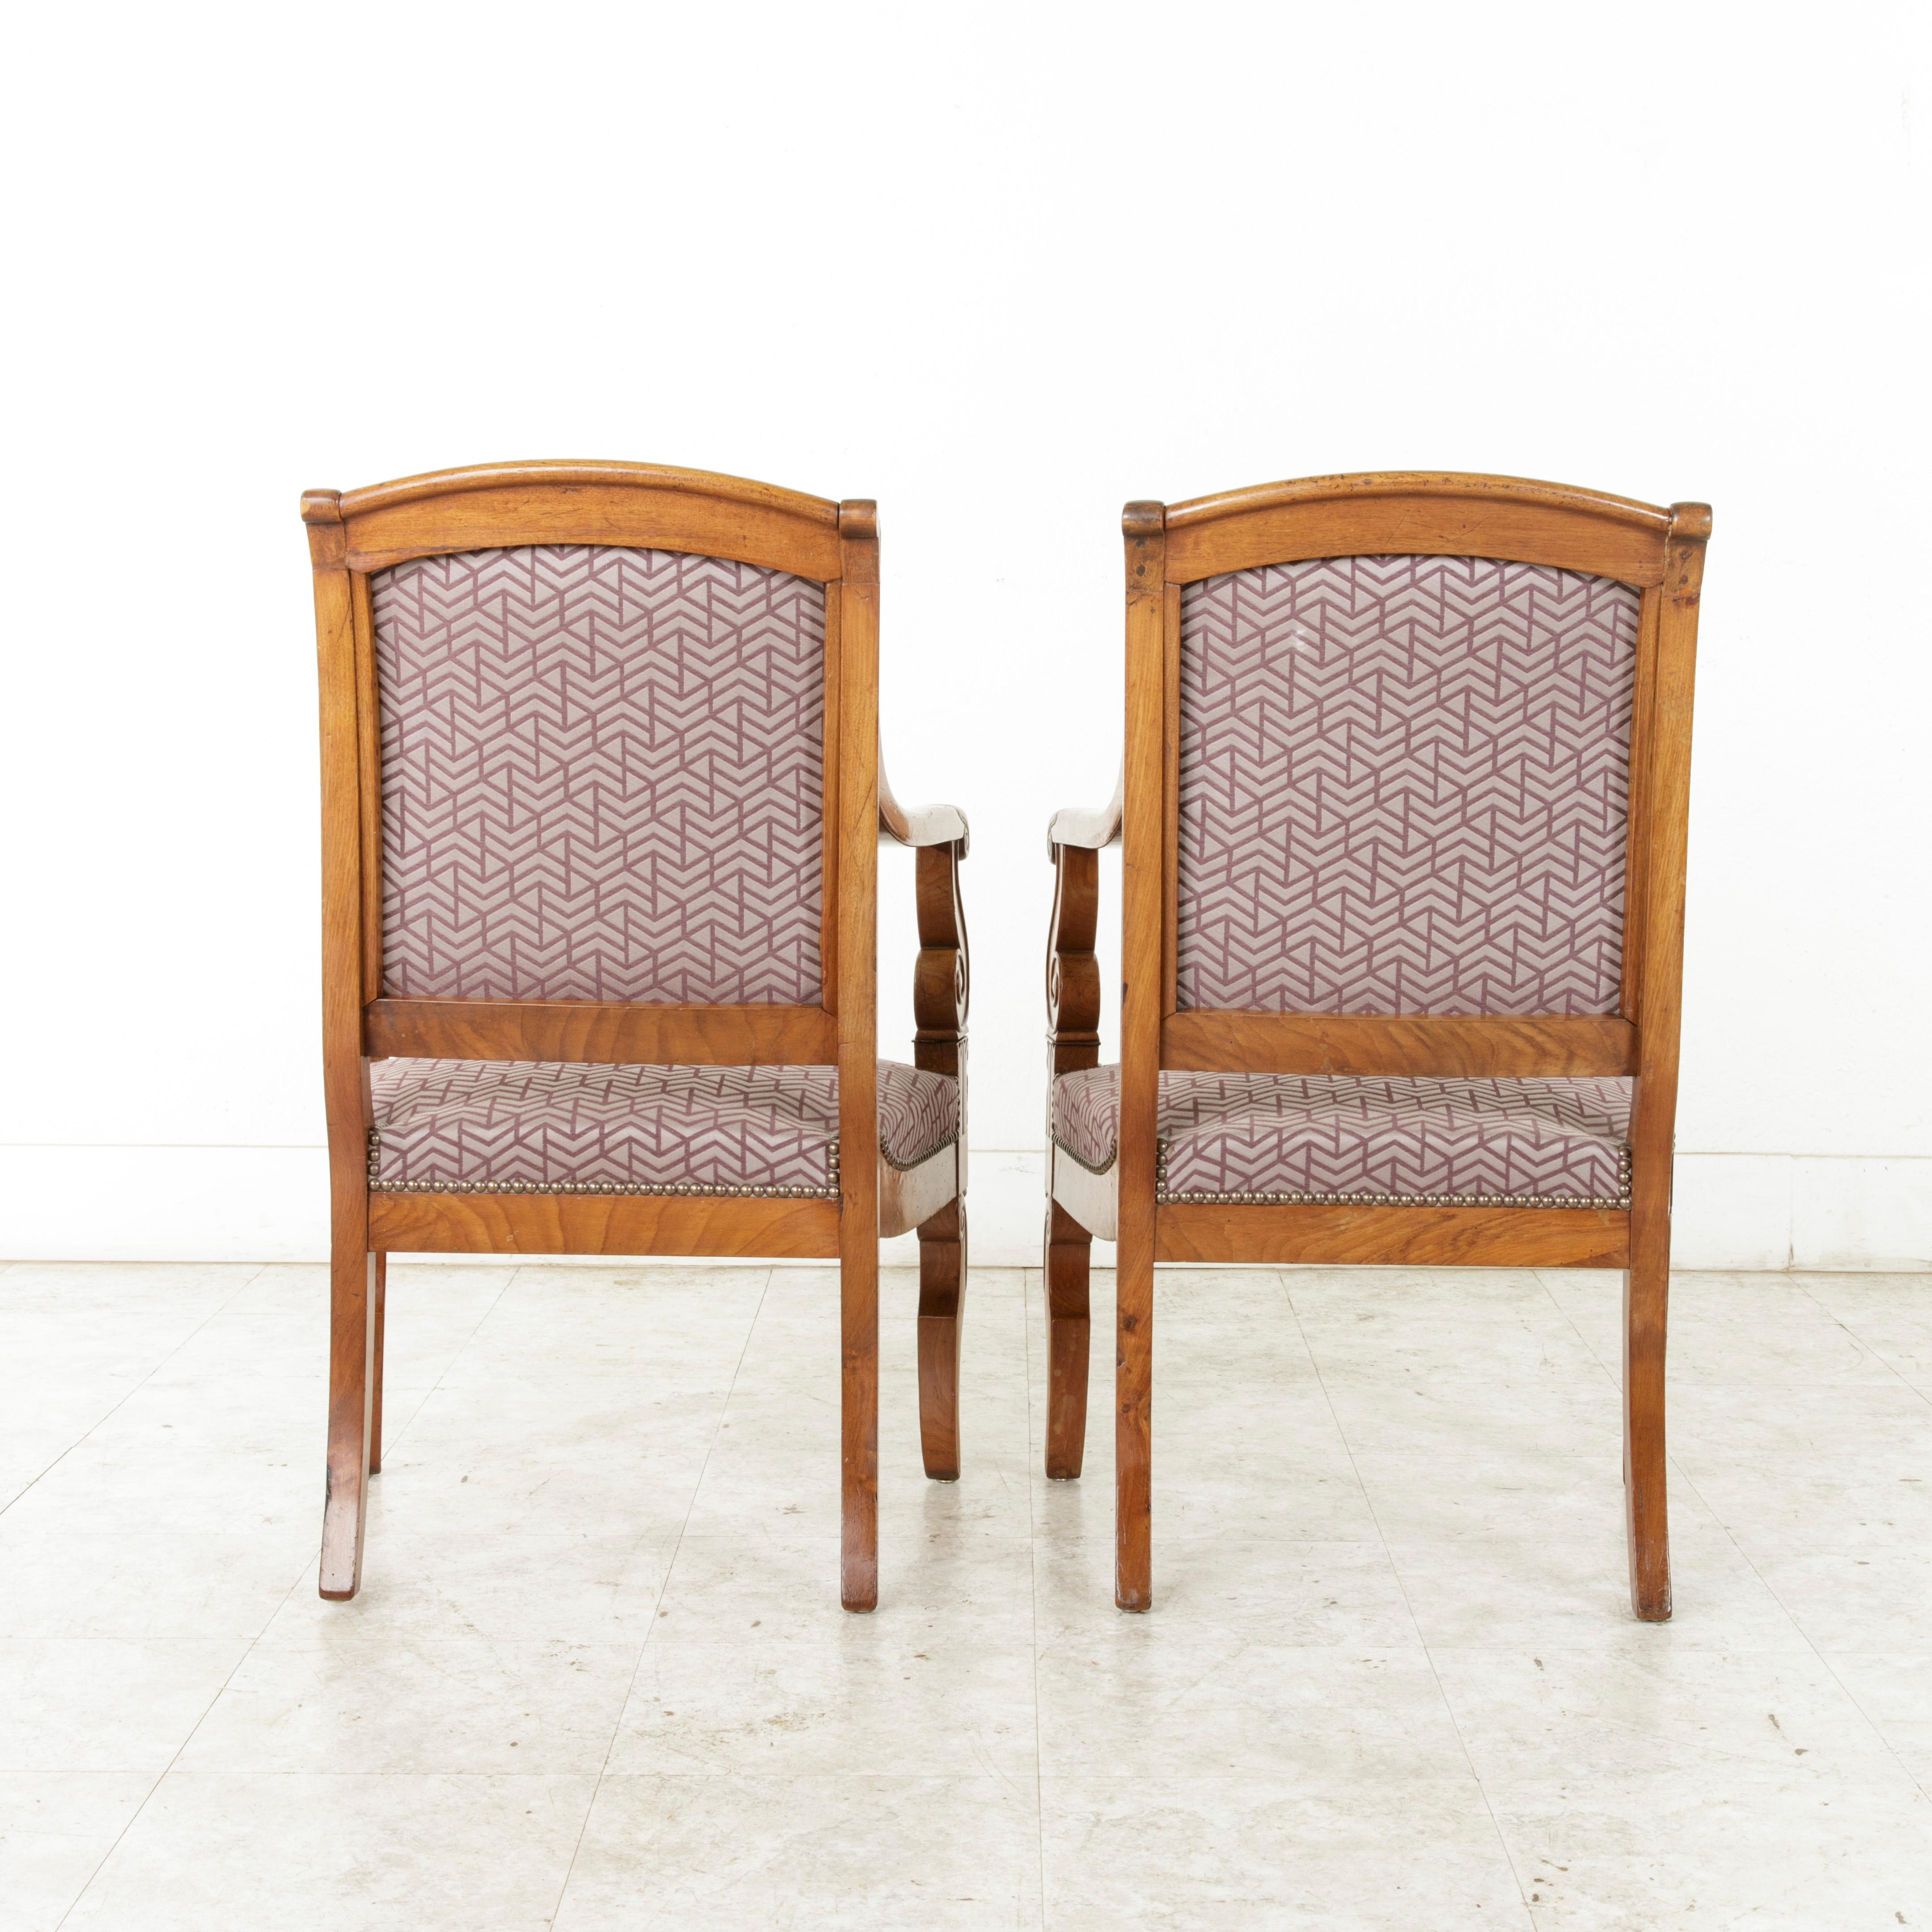 Pair of Mid-19th Century French Restauration Period Walnut Armchairs or Bergeres 1